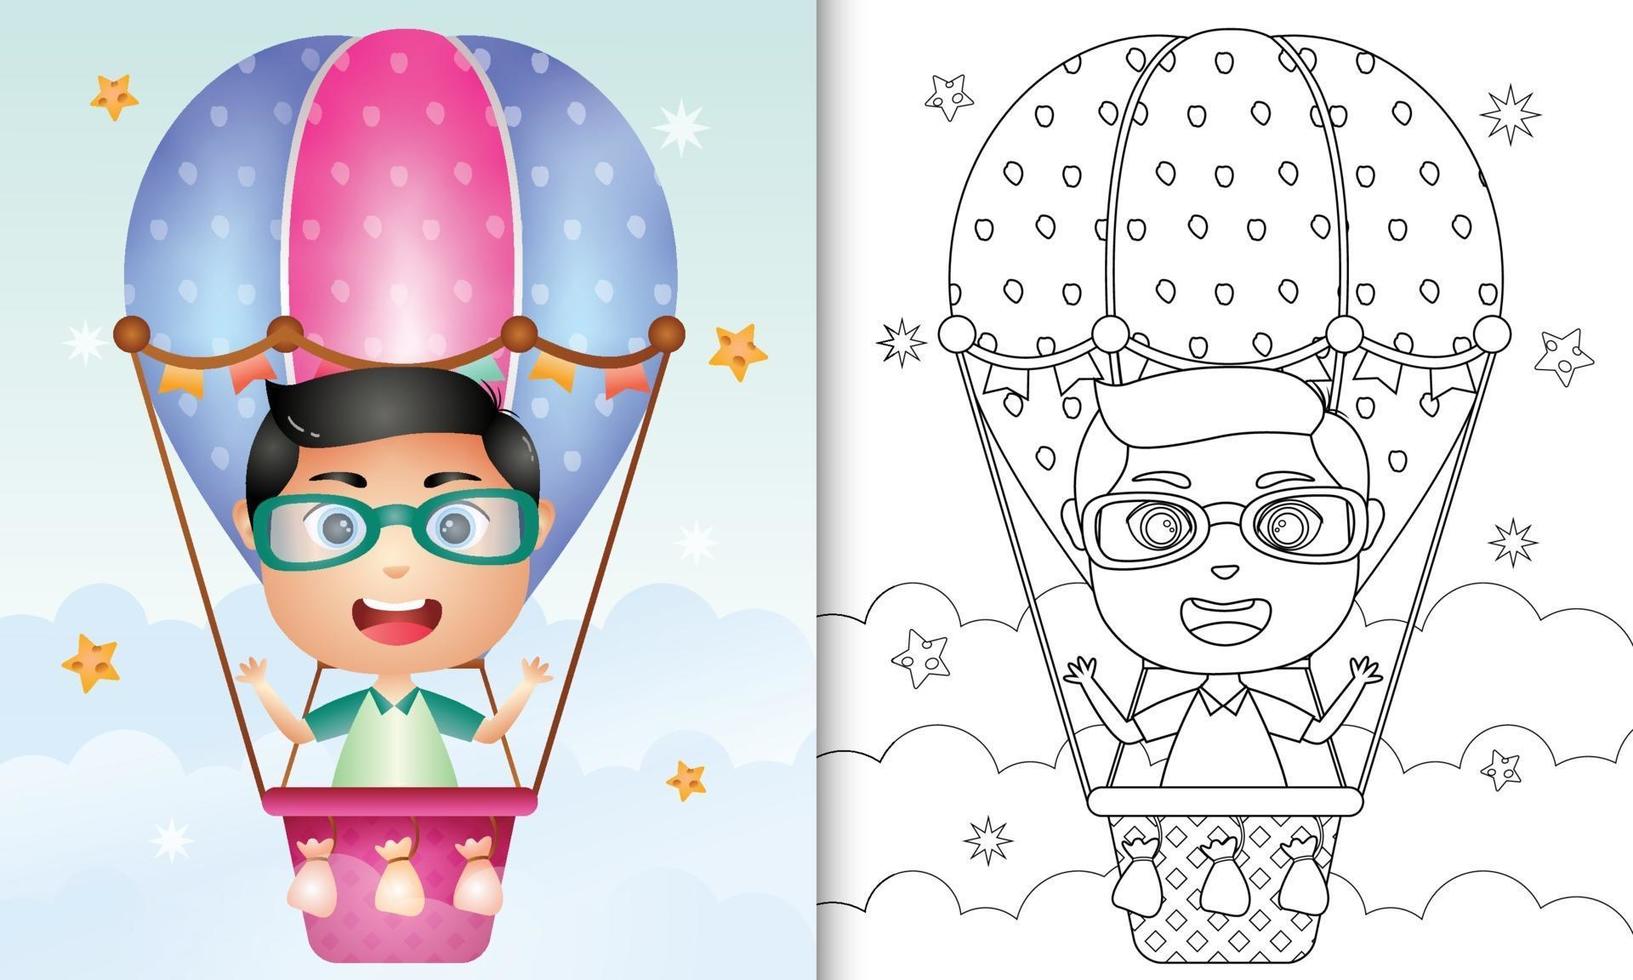 Coloring book for kids with a cute boy on hot air balloon vector